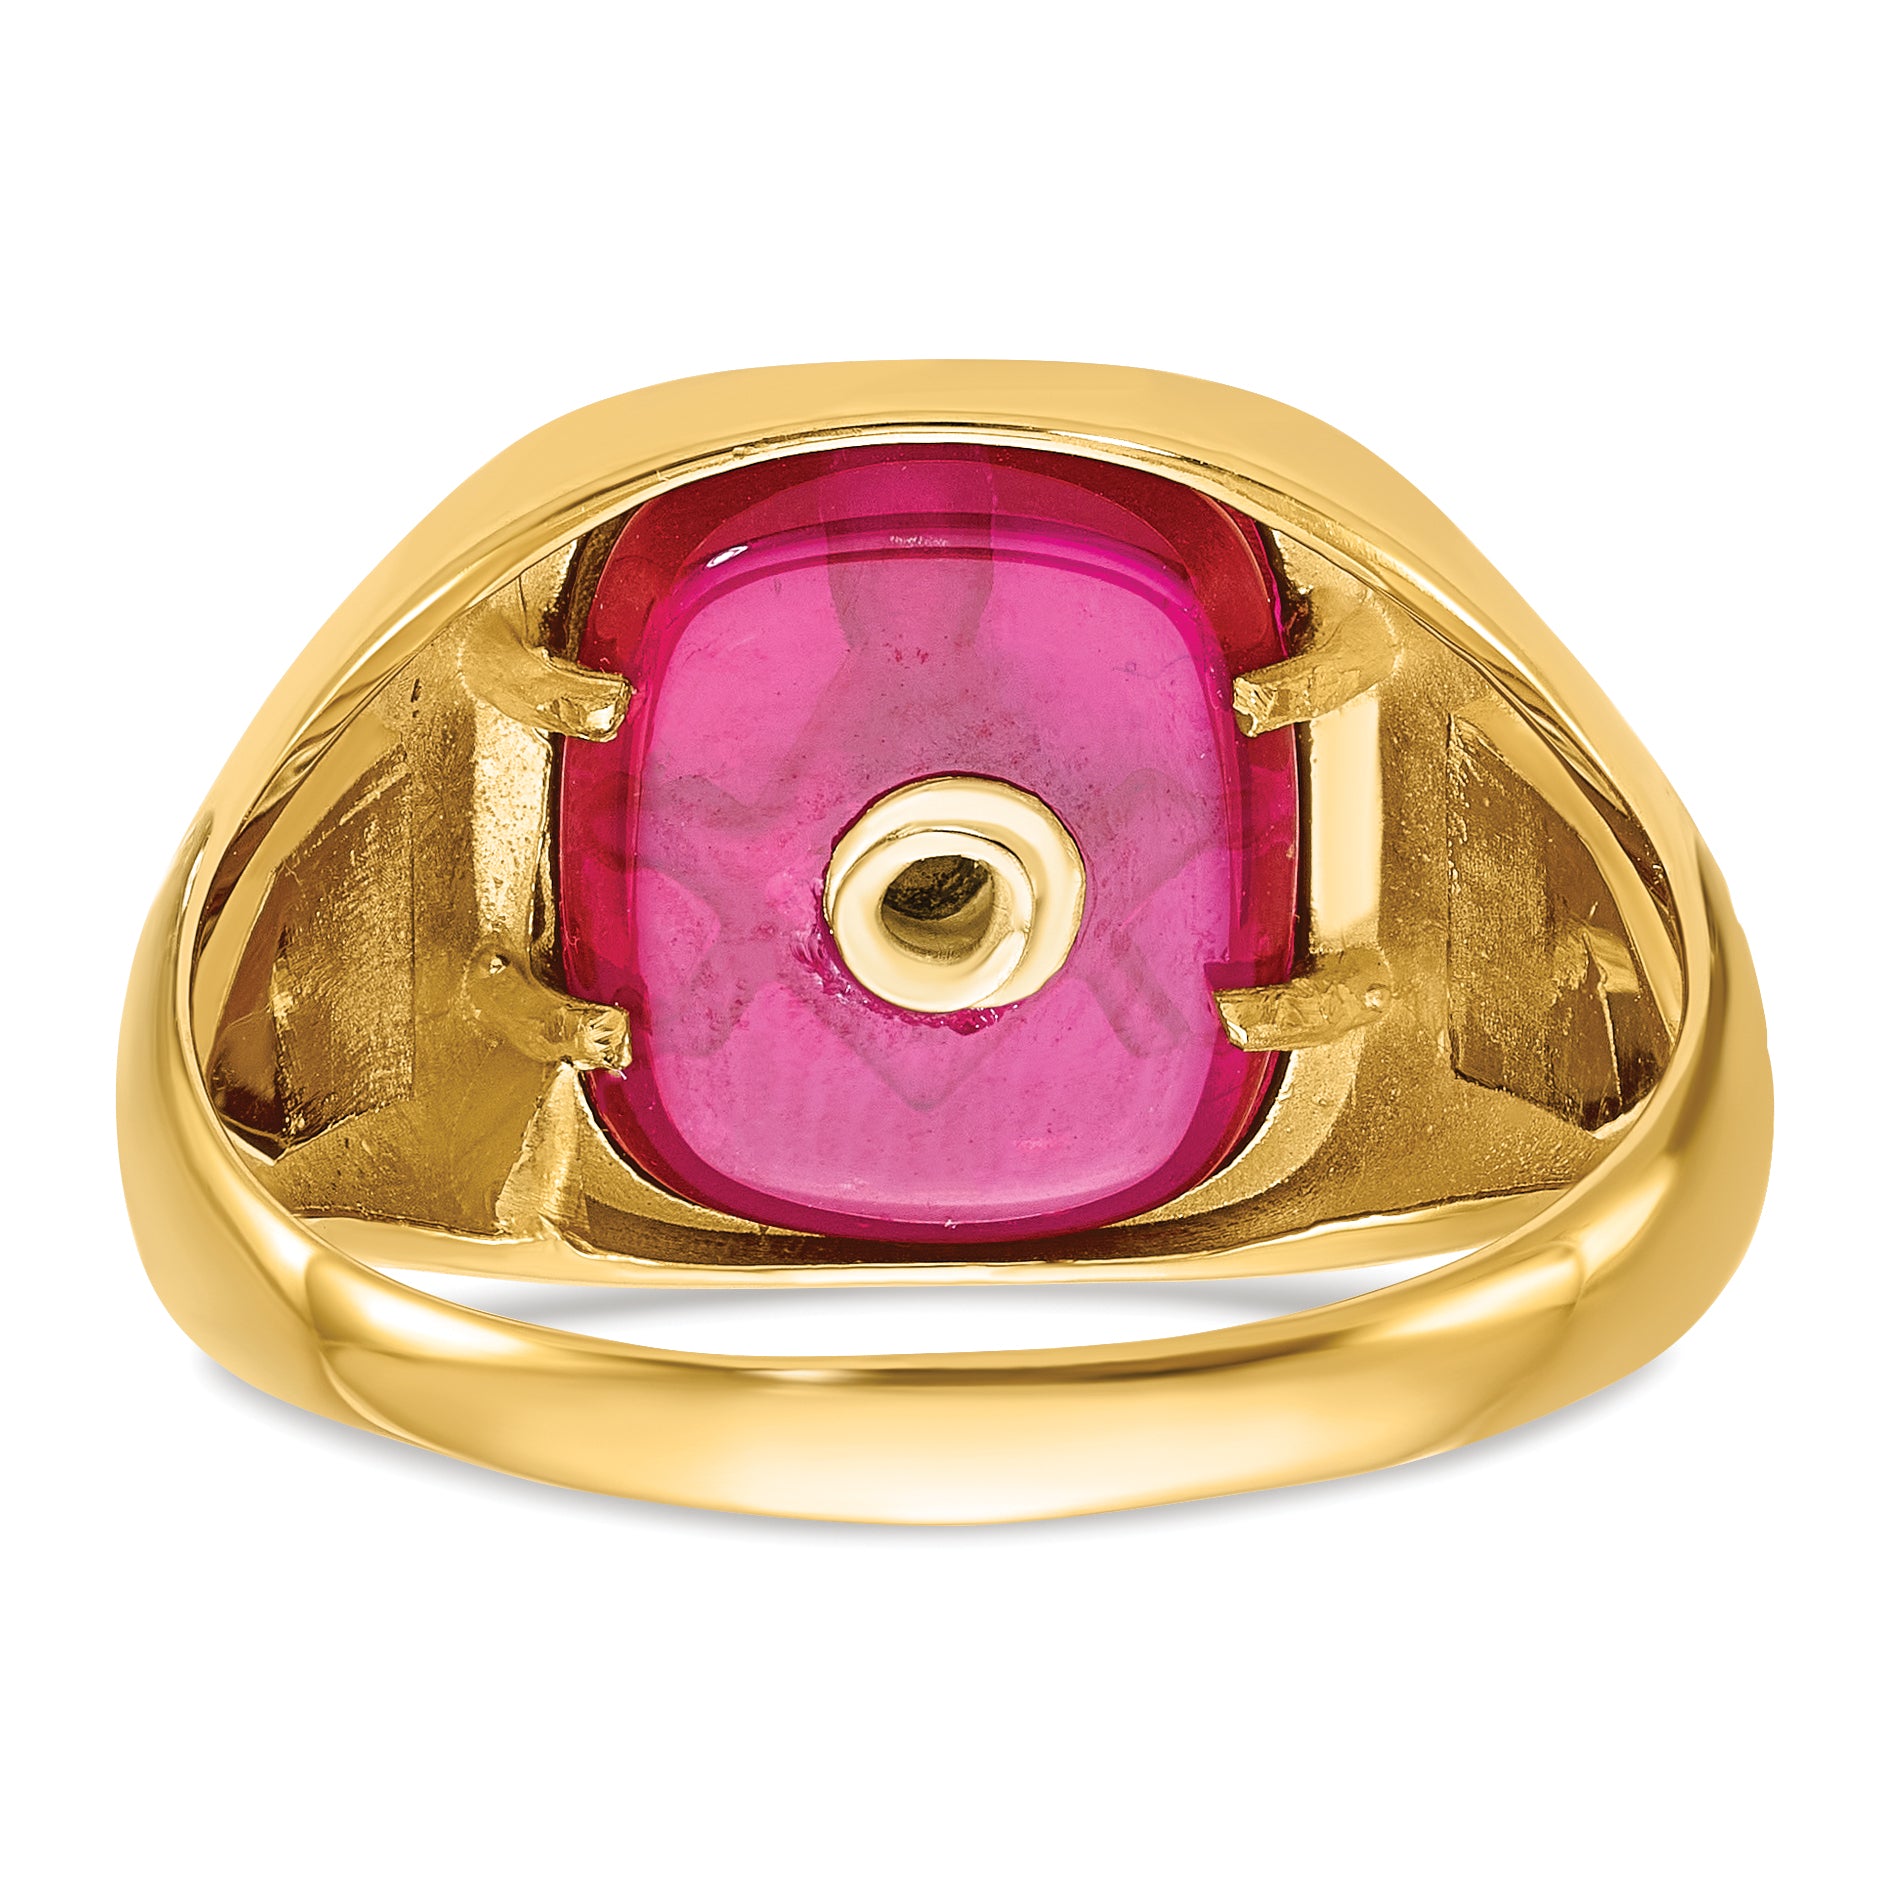 10k Men's Polished and Textured with Black Enamel and Lab Created Ruby Masonic Ring